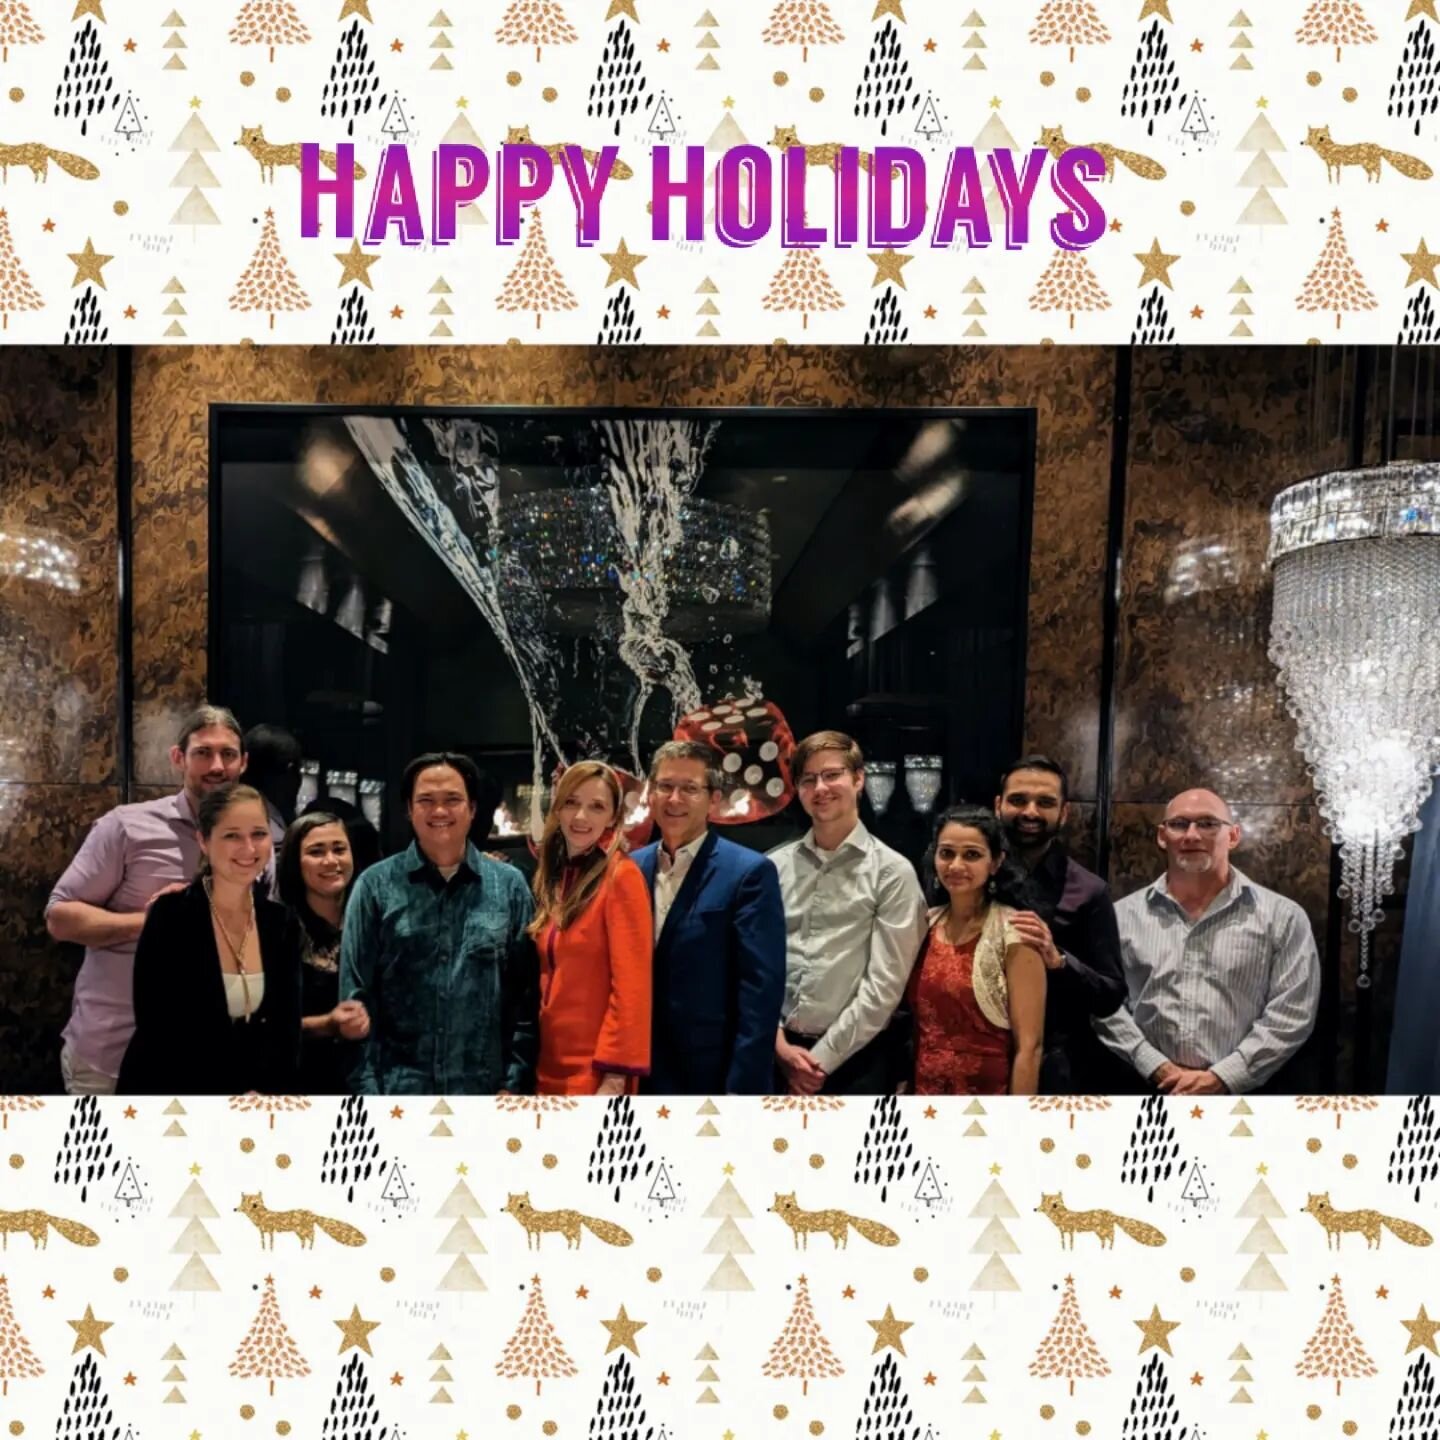 Happy Holidays from all of us at JVC! 
.
.
.
#happyholidays #merrychristmas #archdaily #architect #wishingjoyandhappiness #architectectures #architecture #lasvegasarchitect